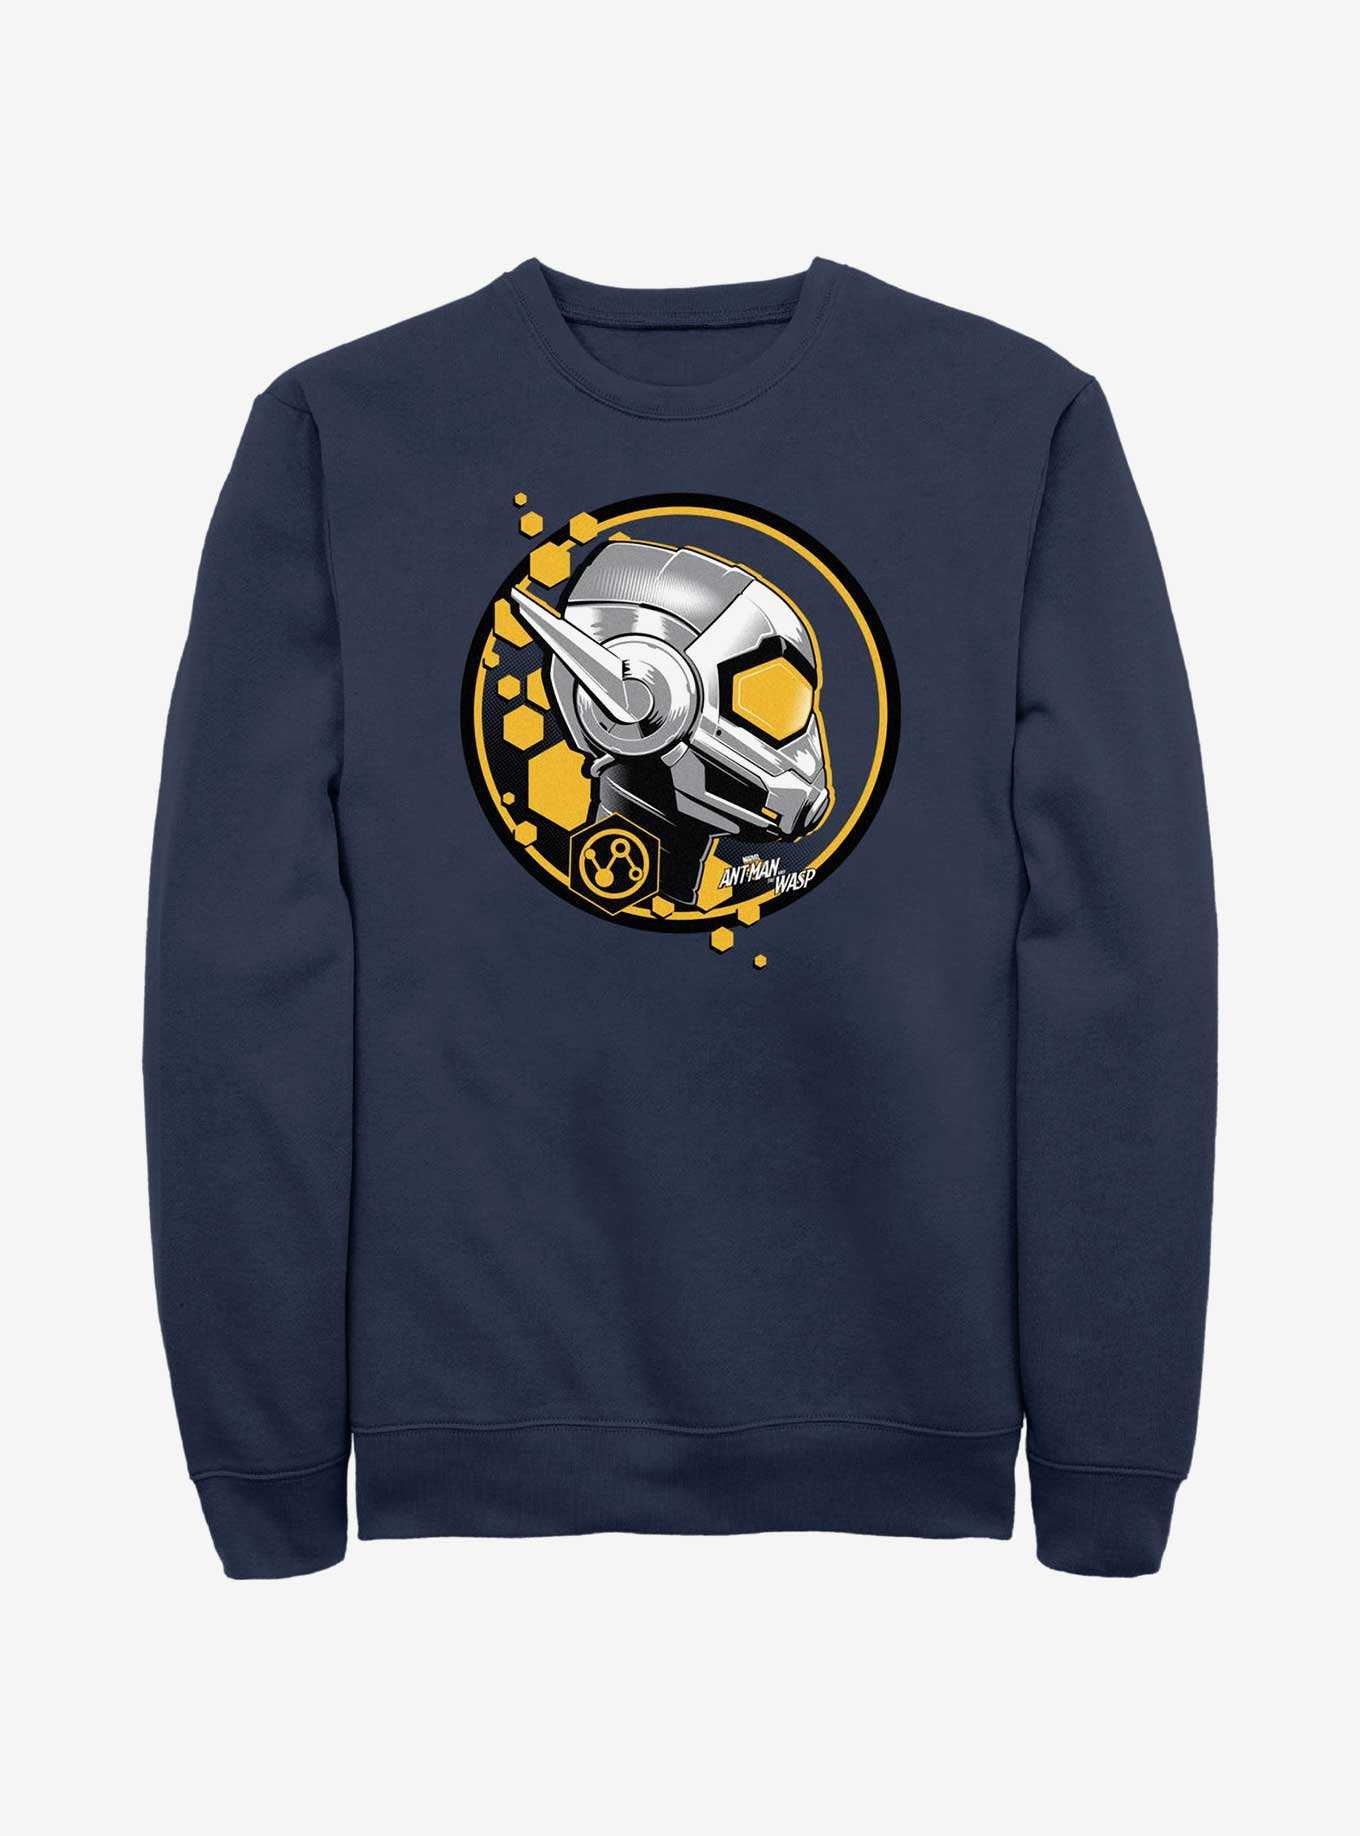 Marvel Ant-Man and the Wasp: Quantumania Wasp Stamp Sweatshirt, , hi-res